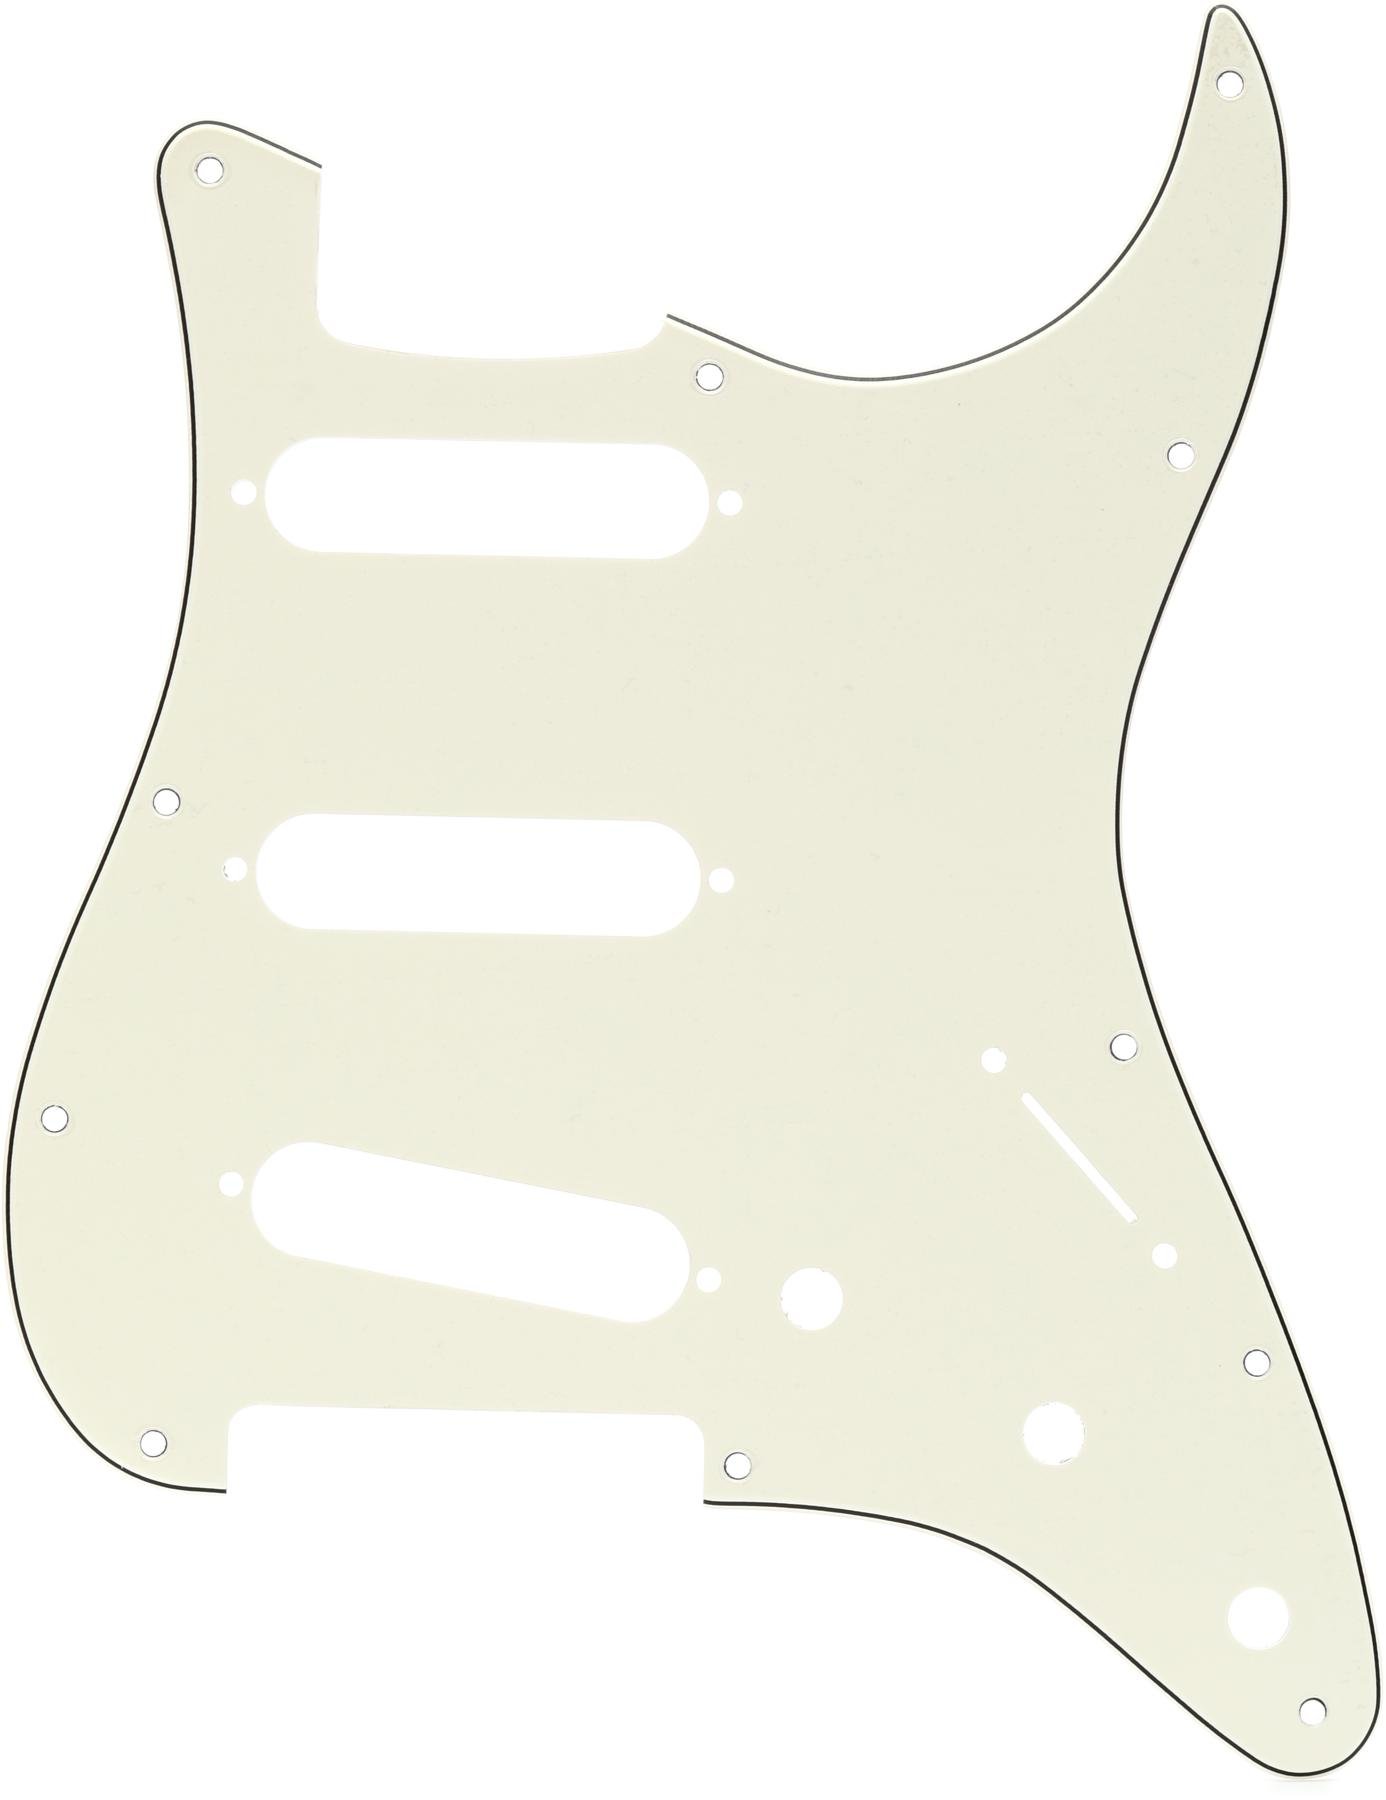 Dopro 11 Hole ST Strat SSS Metal Guitar Pickguard Aluminum Scrach Plate for USA/Mexican Fender Stratocaster Gold